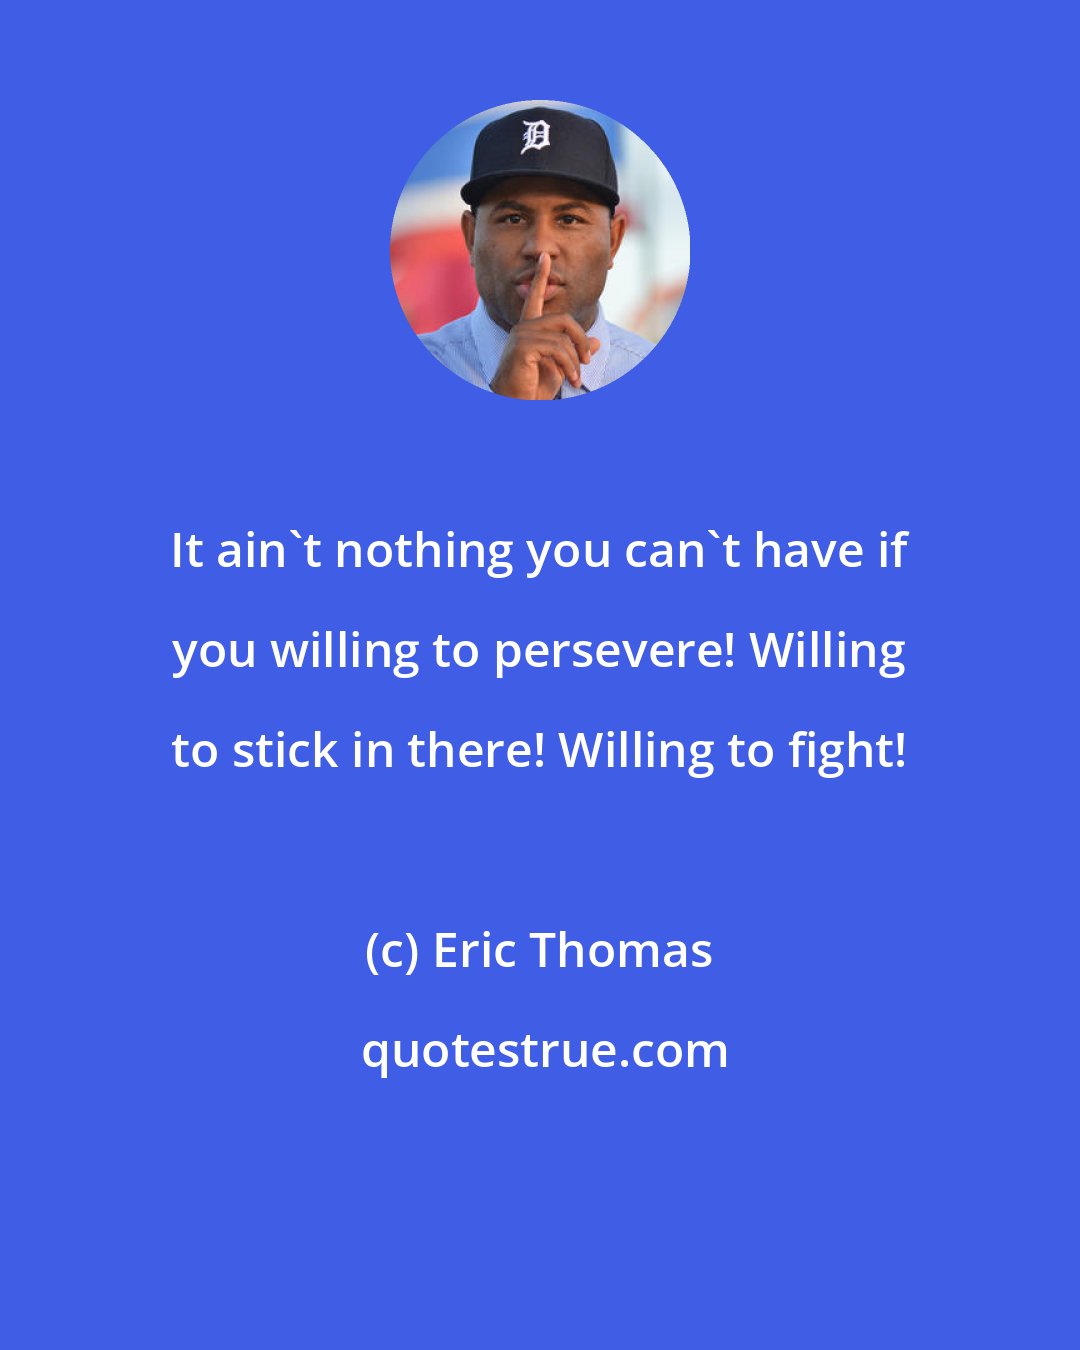 Eric Thomas: It ain't nothing you can't have if you willing to persevere! Willing to stick in there! Willing to fight!